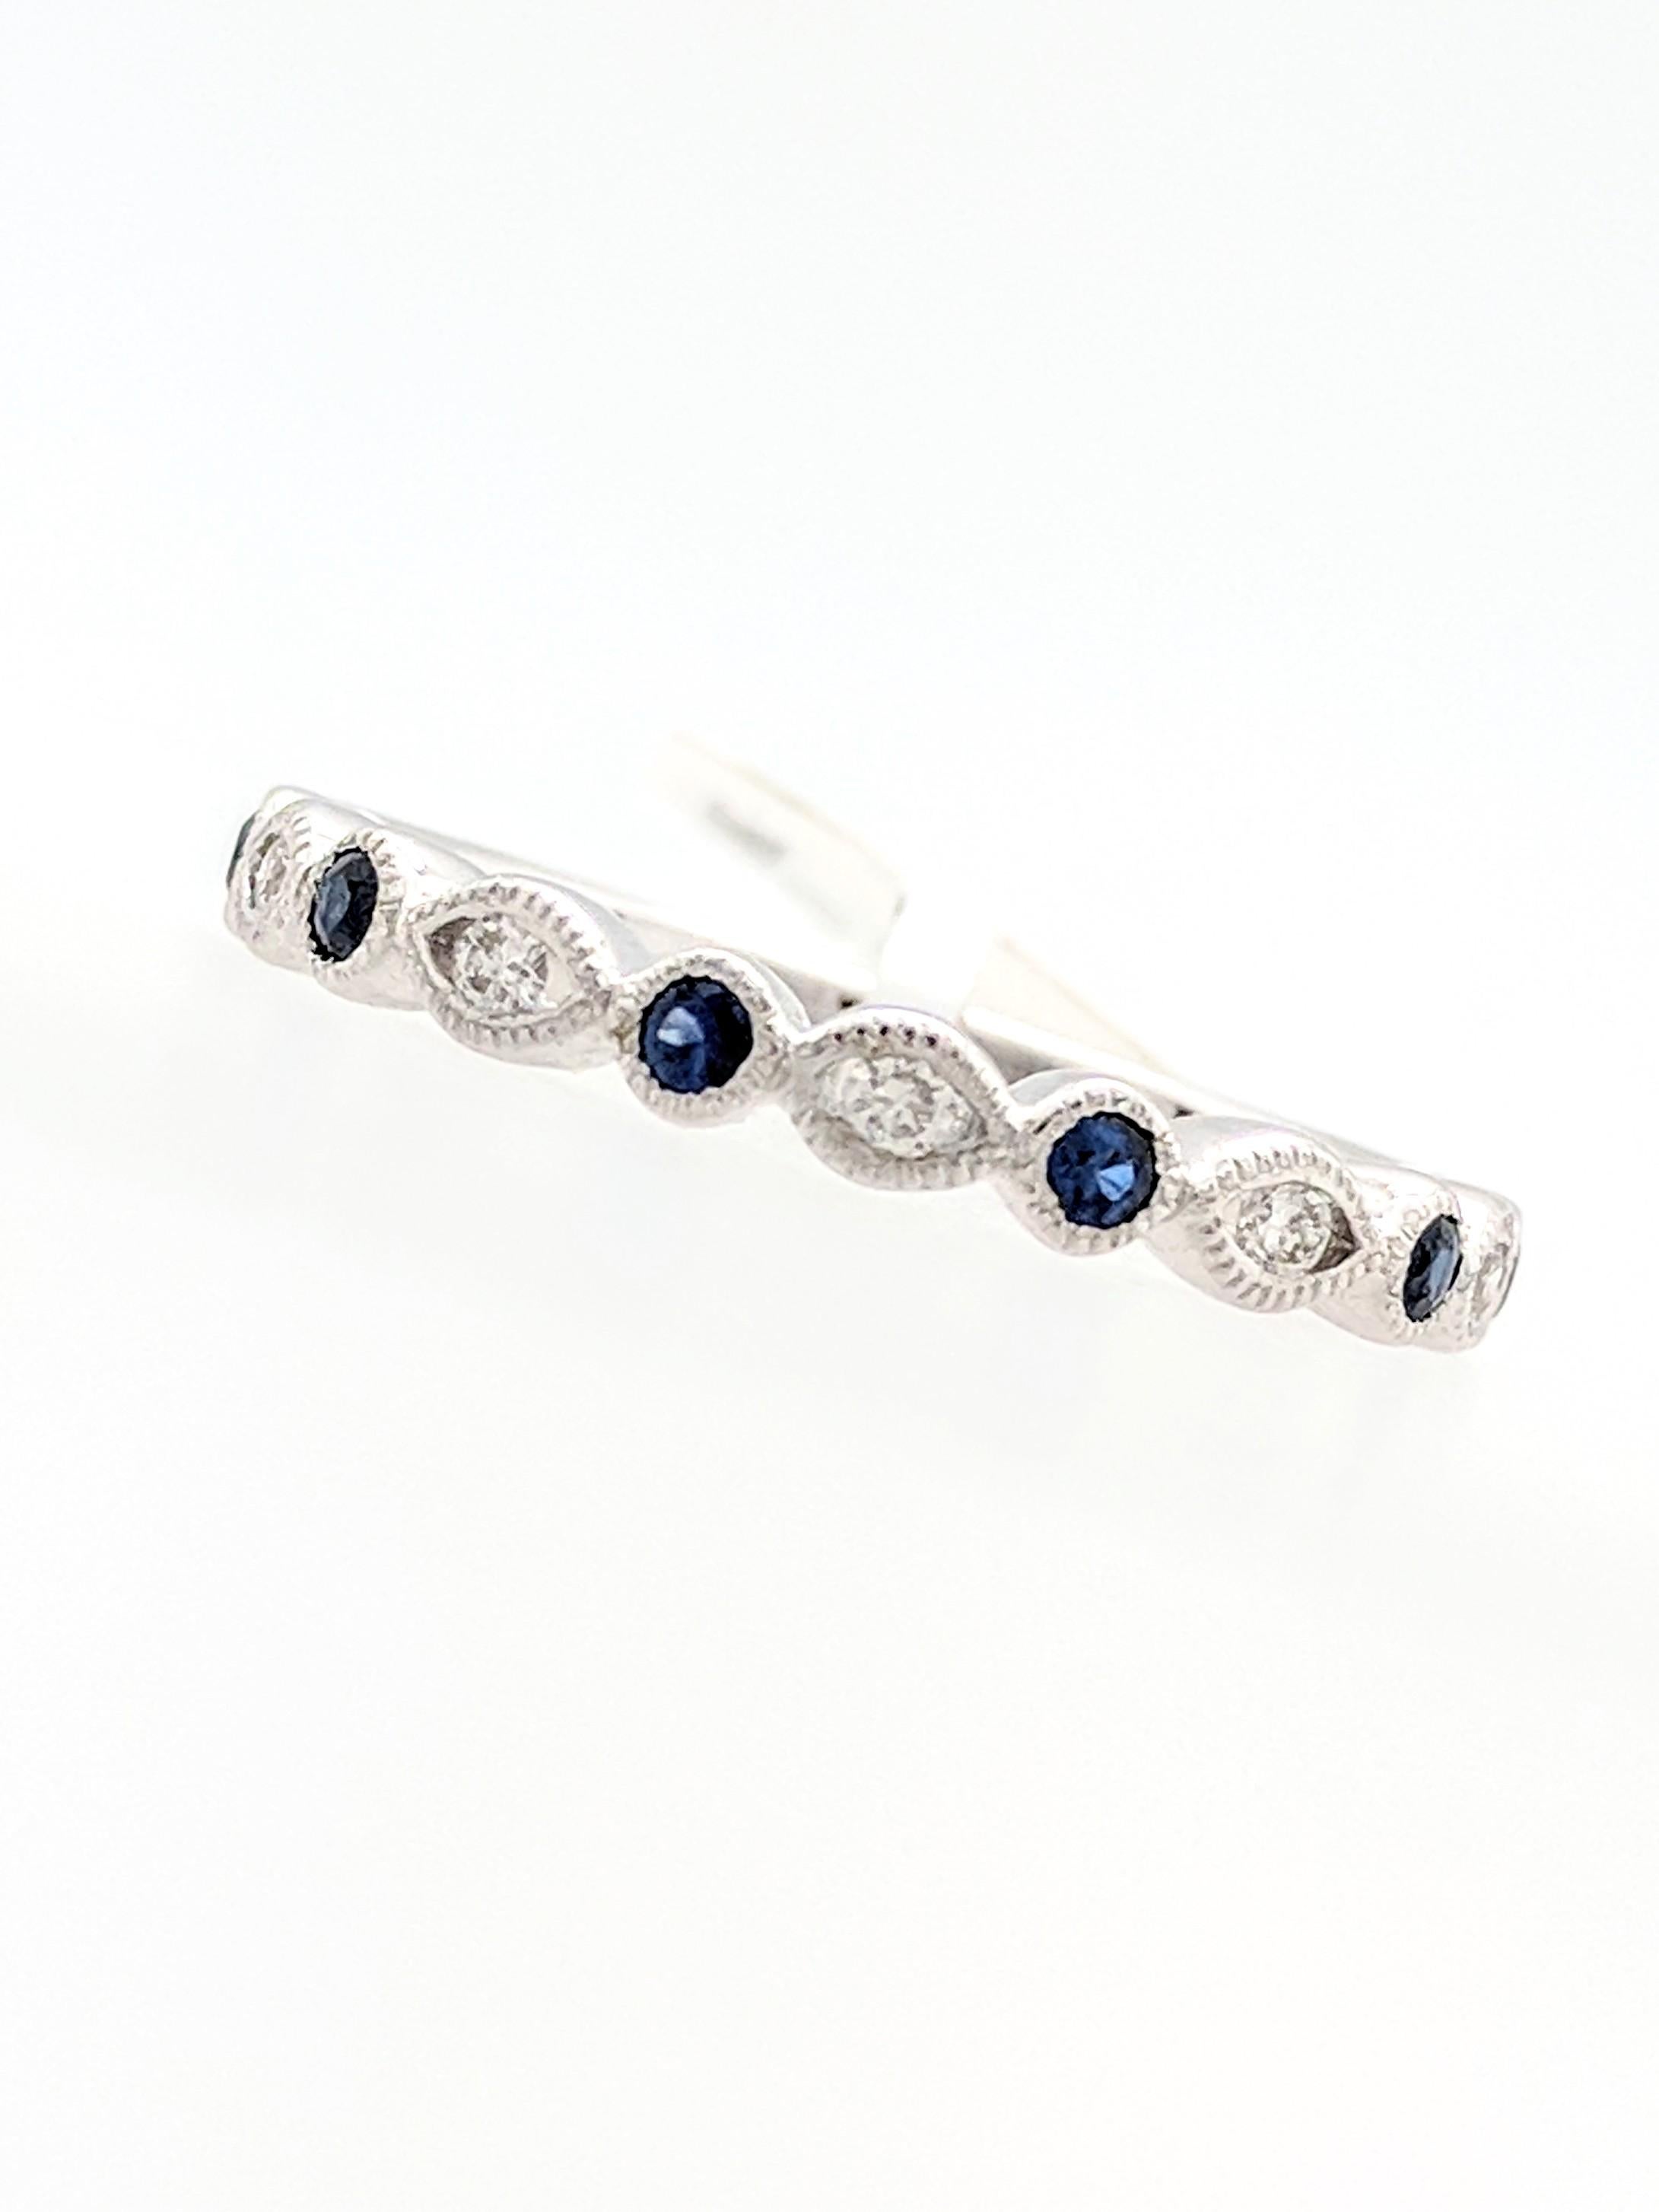 You are viewing a Beautiful Sapphire & Diamond Stackable Band. This ring is crafted from 18k white gold and weighs 3 grams. It features (6) natural round blue sapphires for an estimated 0.19tcw and (5) natural round brilliant cut diamonds for an